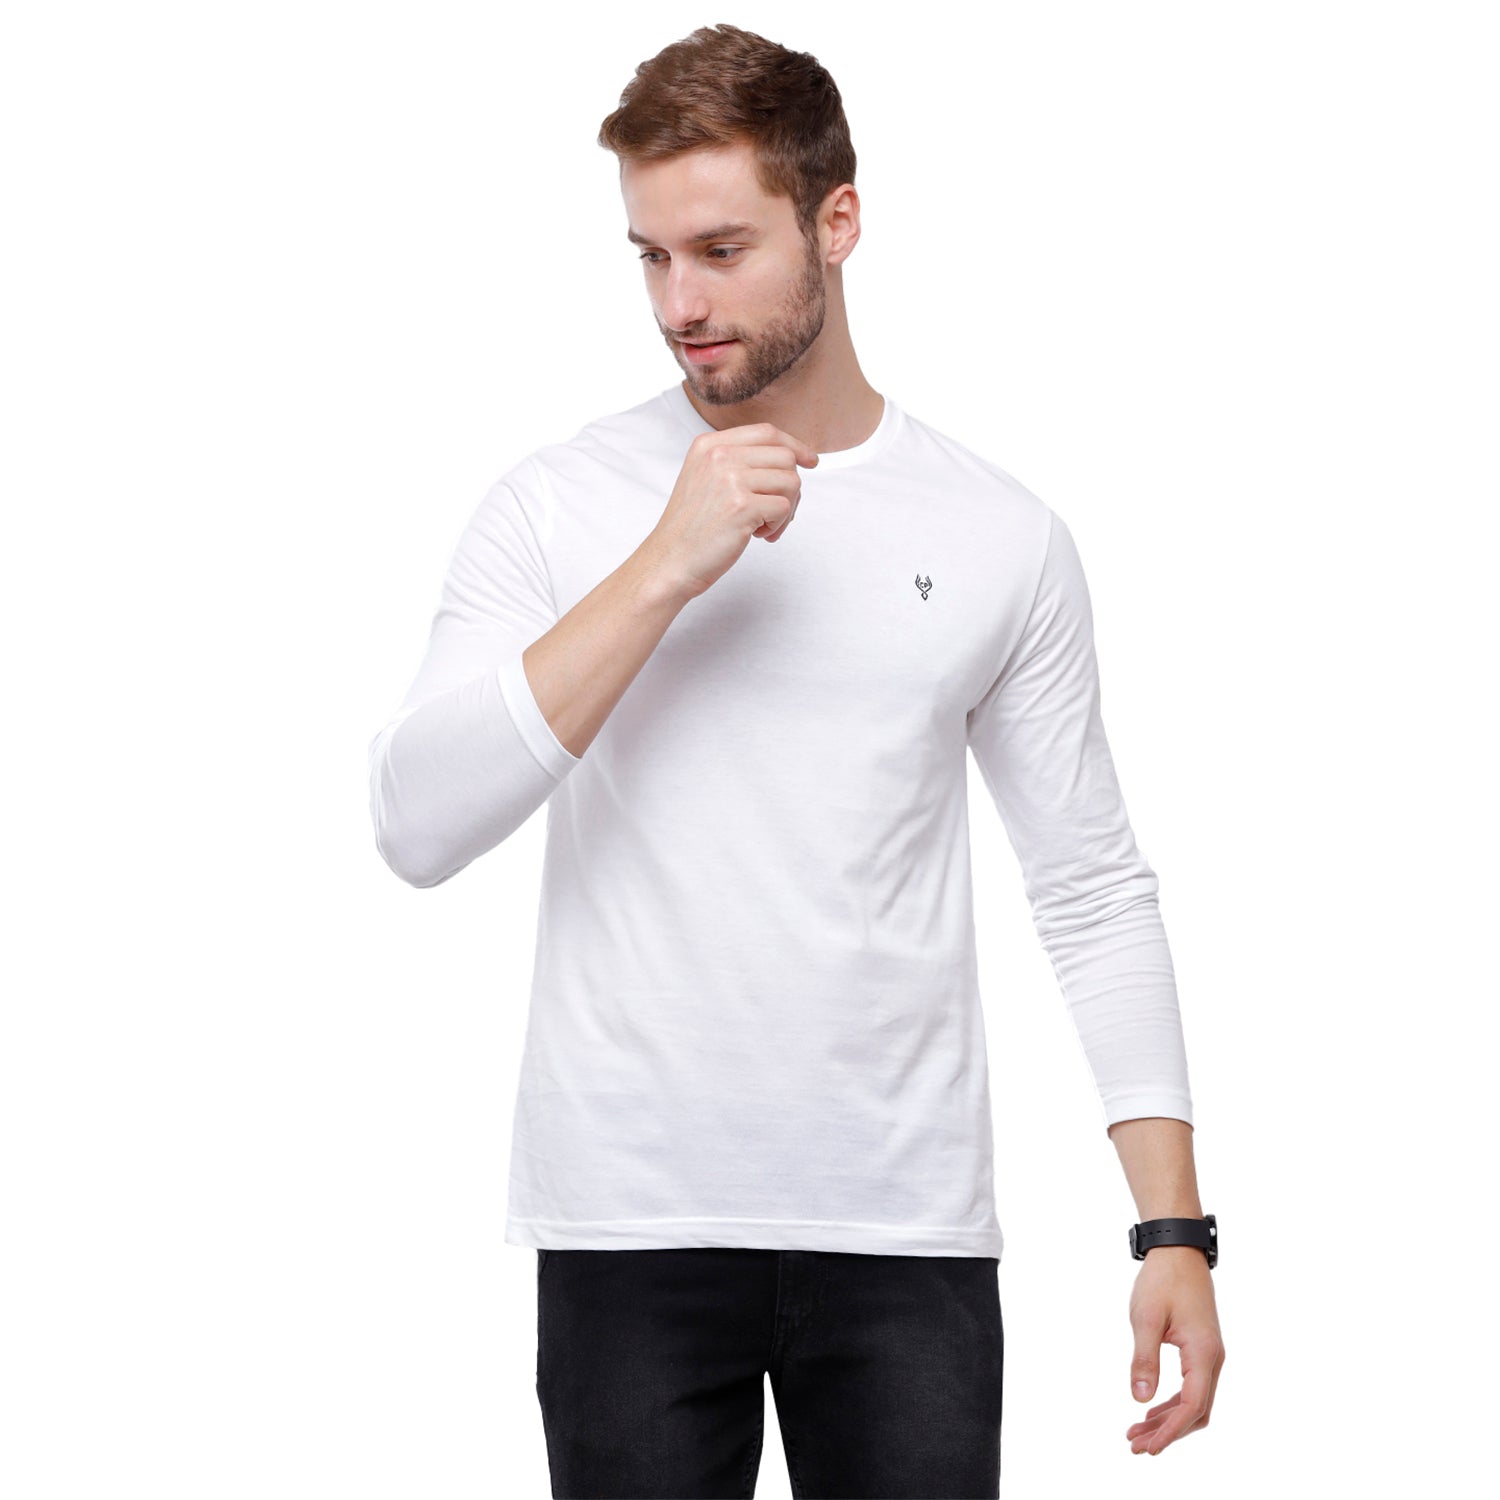 Classic polo Men's White Single Jersey Crew Neck Full Sleeve Slim Fit T-Shirt - Comet 01 T-shirt Classic Polo 